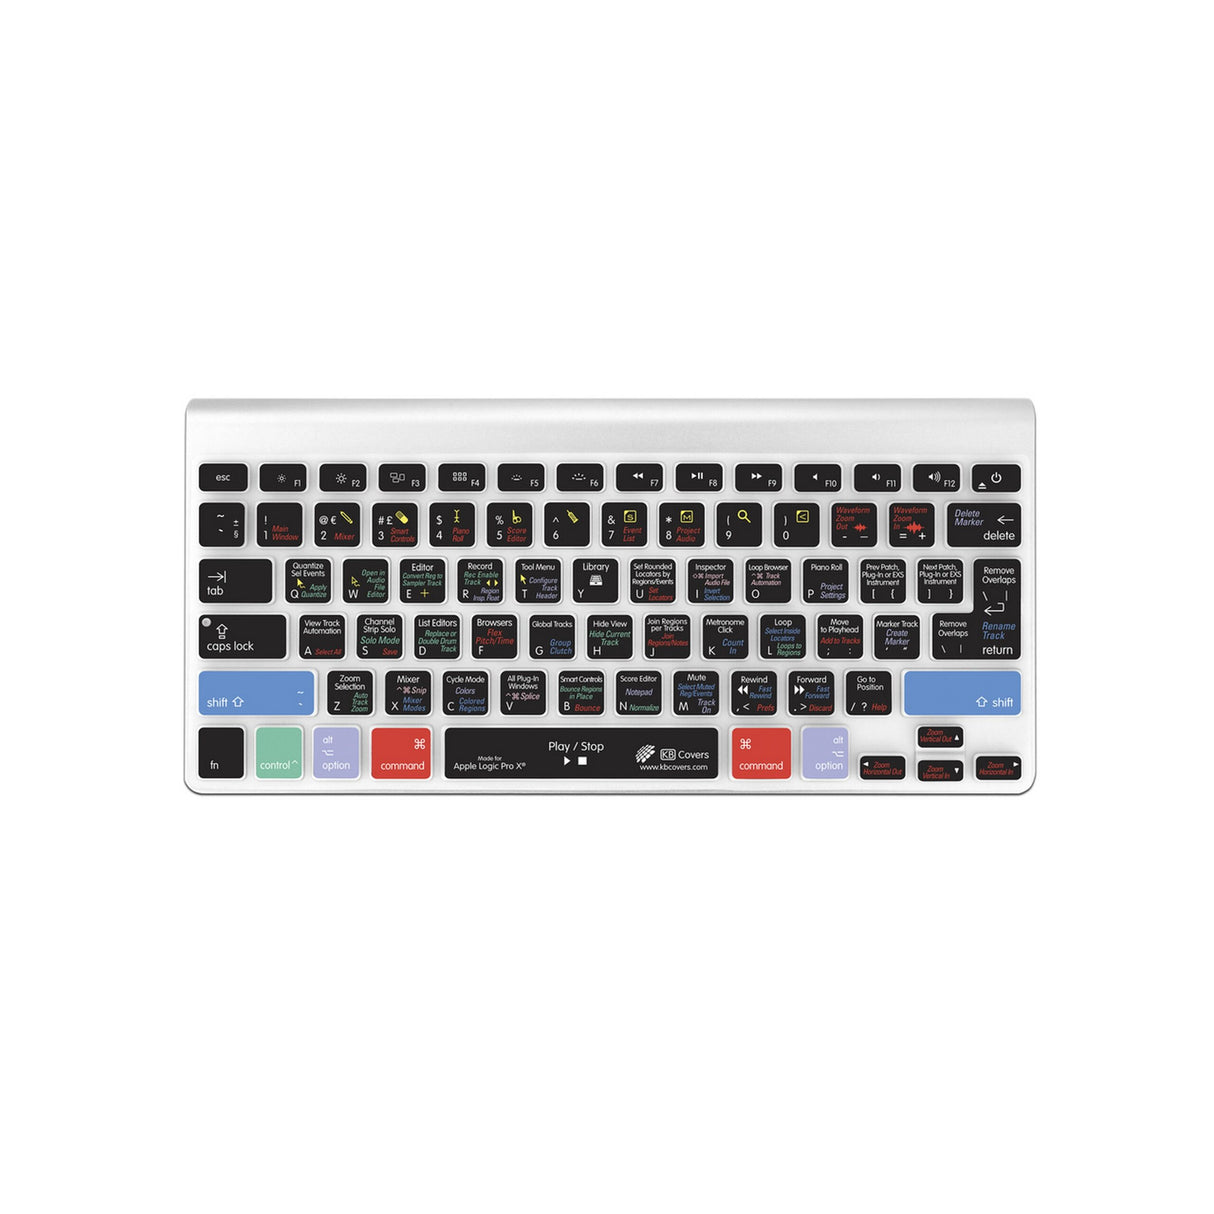 KB Covers LOGX-M-CC-2 Logic Pro X Keyboard Cover for MacBook/Air 13/Pro 2008+/Retina and Wireless